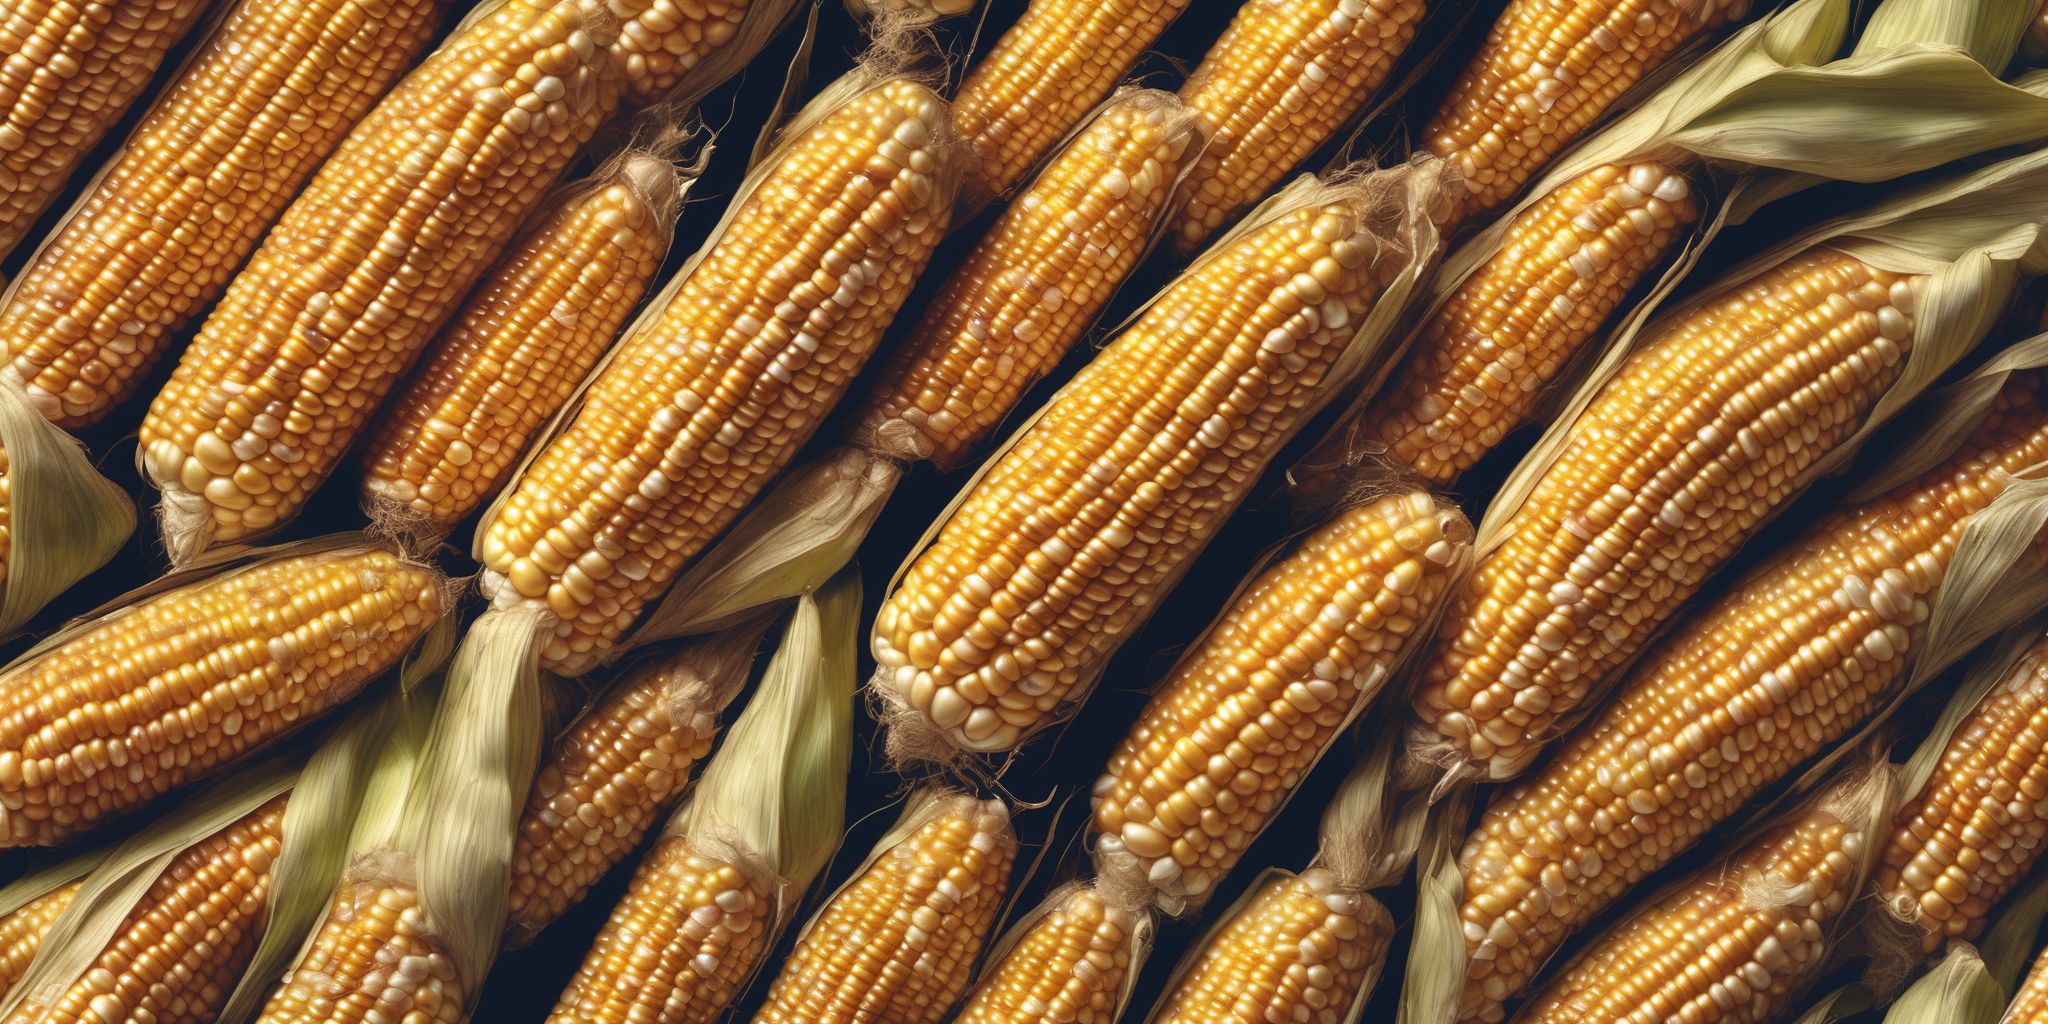 Corn  in realistic, photographic style